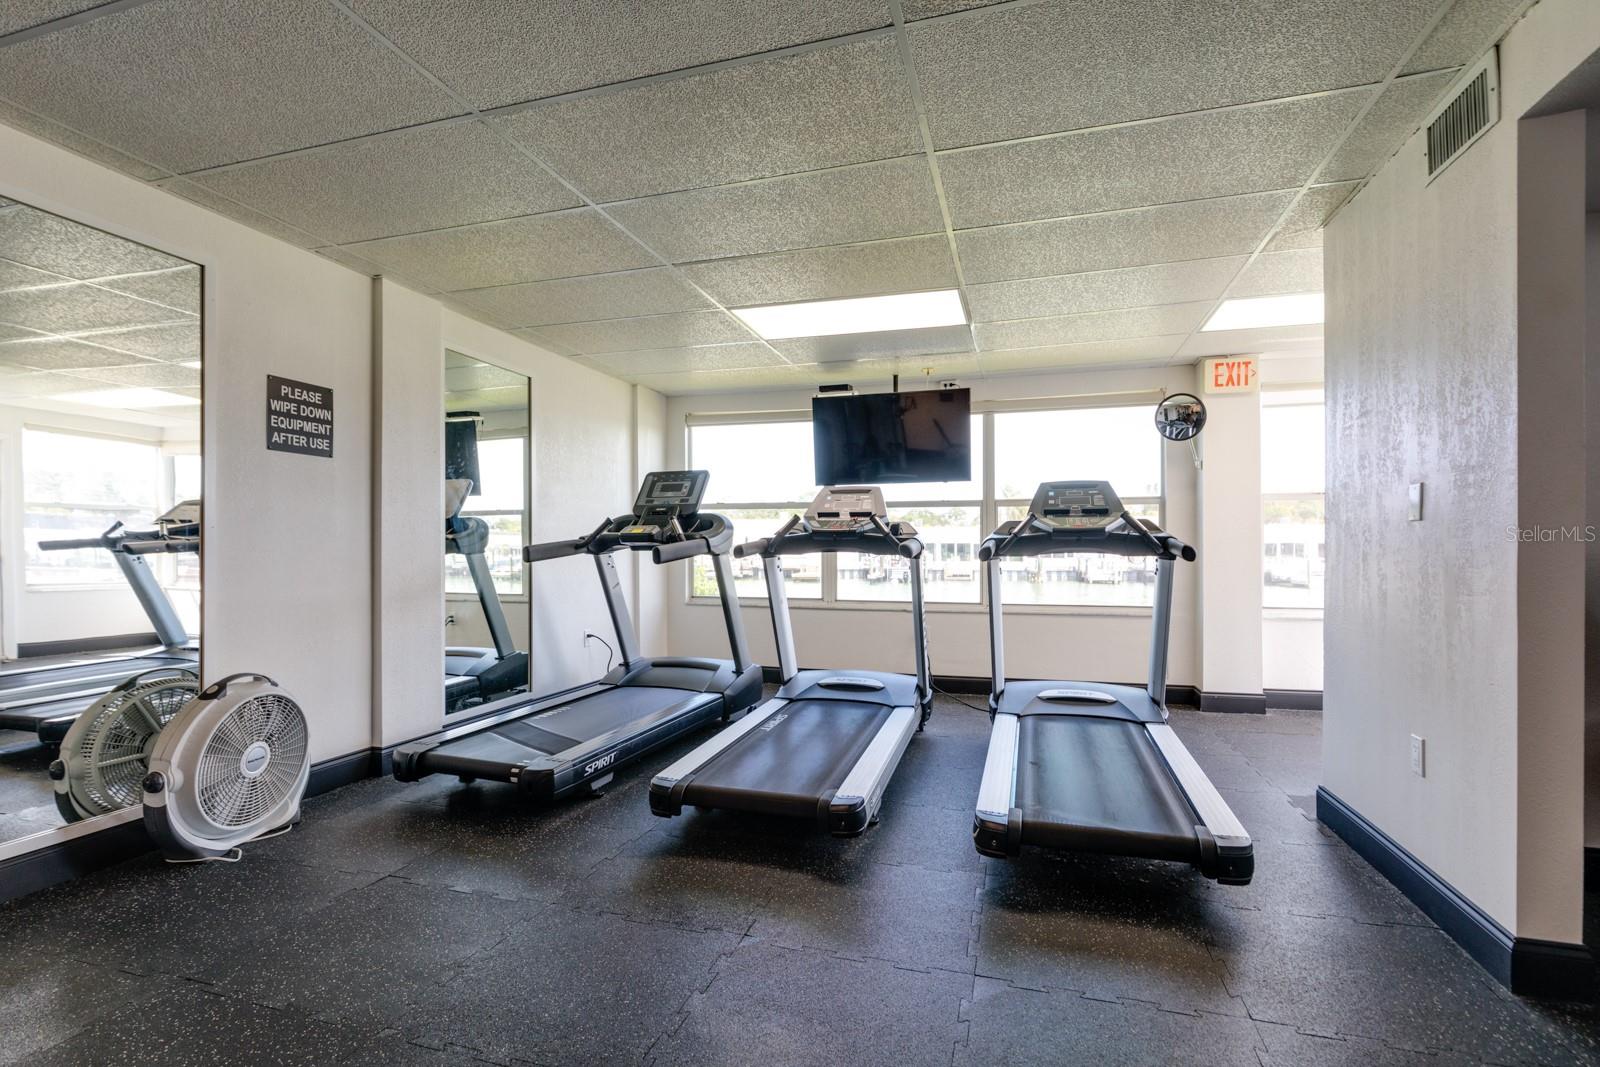 WORKOUT FACILITIES - 4 COMPLETE ROOMS